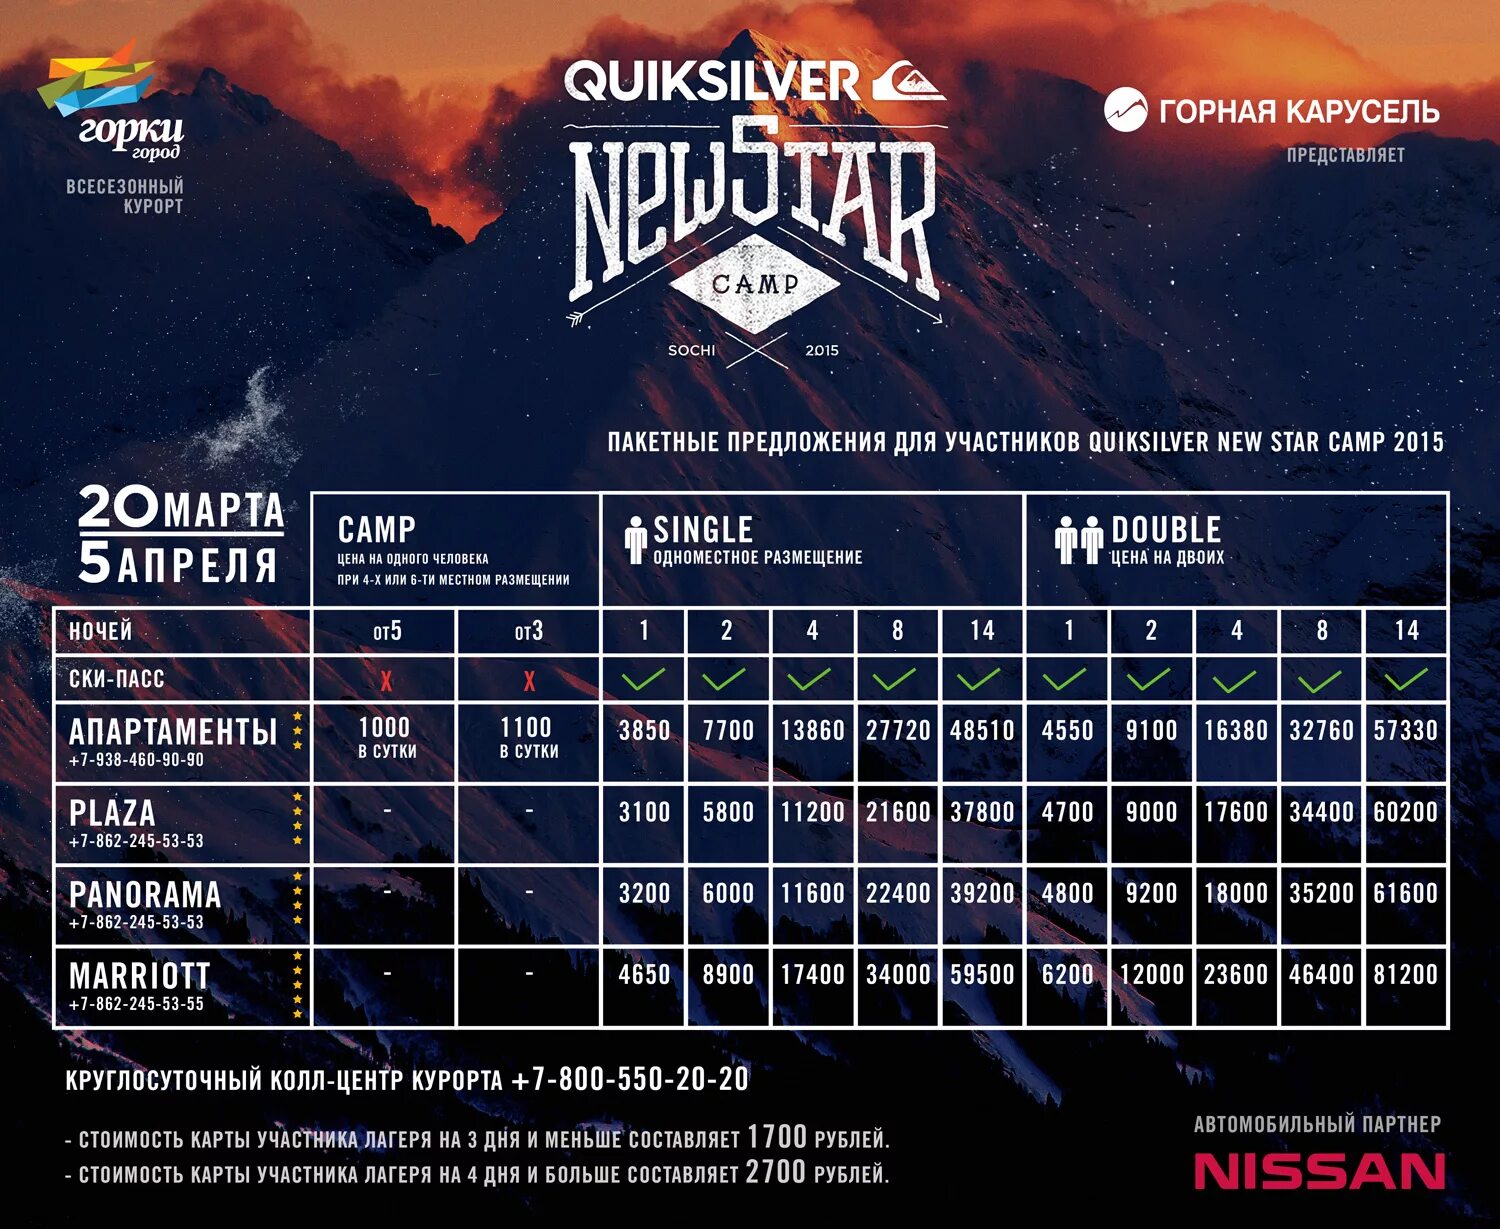 Quiksilver New Star Camp. New Star Camp 2022. Quicksilver New Camp Star Camp. New Star Camp 2019.